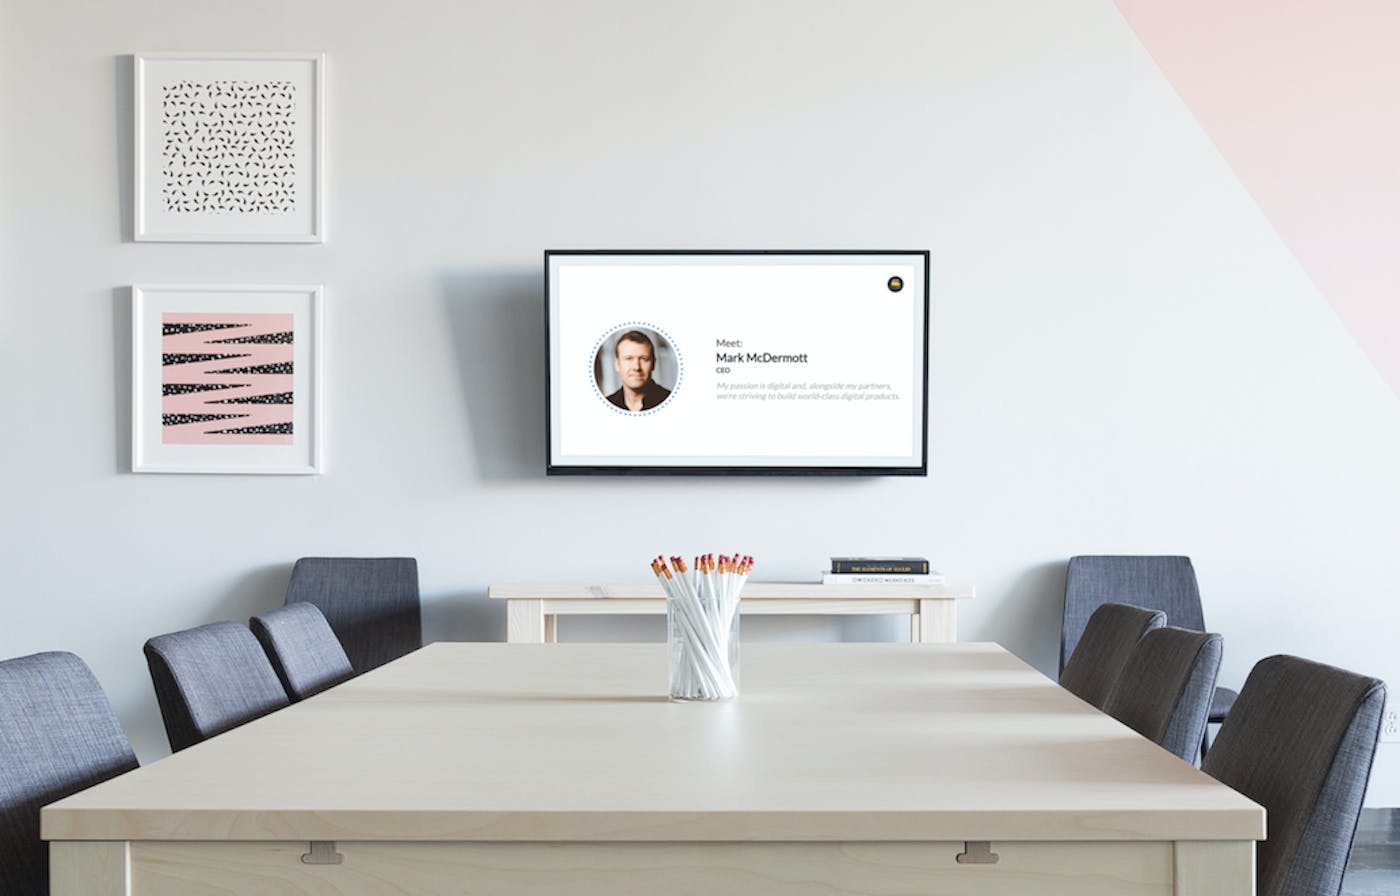 ScreenCloud Article - How to Have Better Meetings With Digital Signage